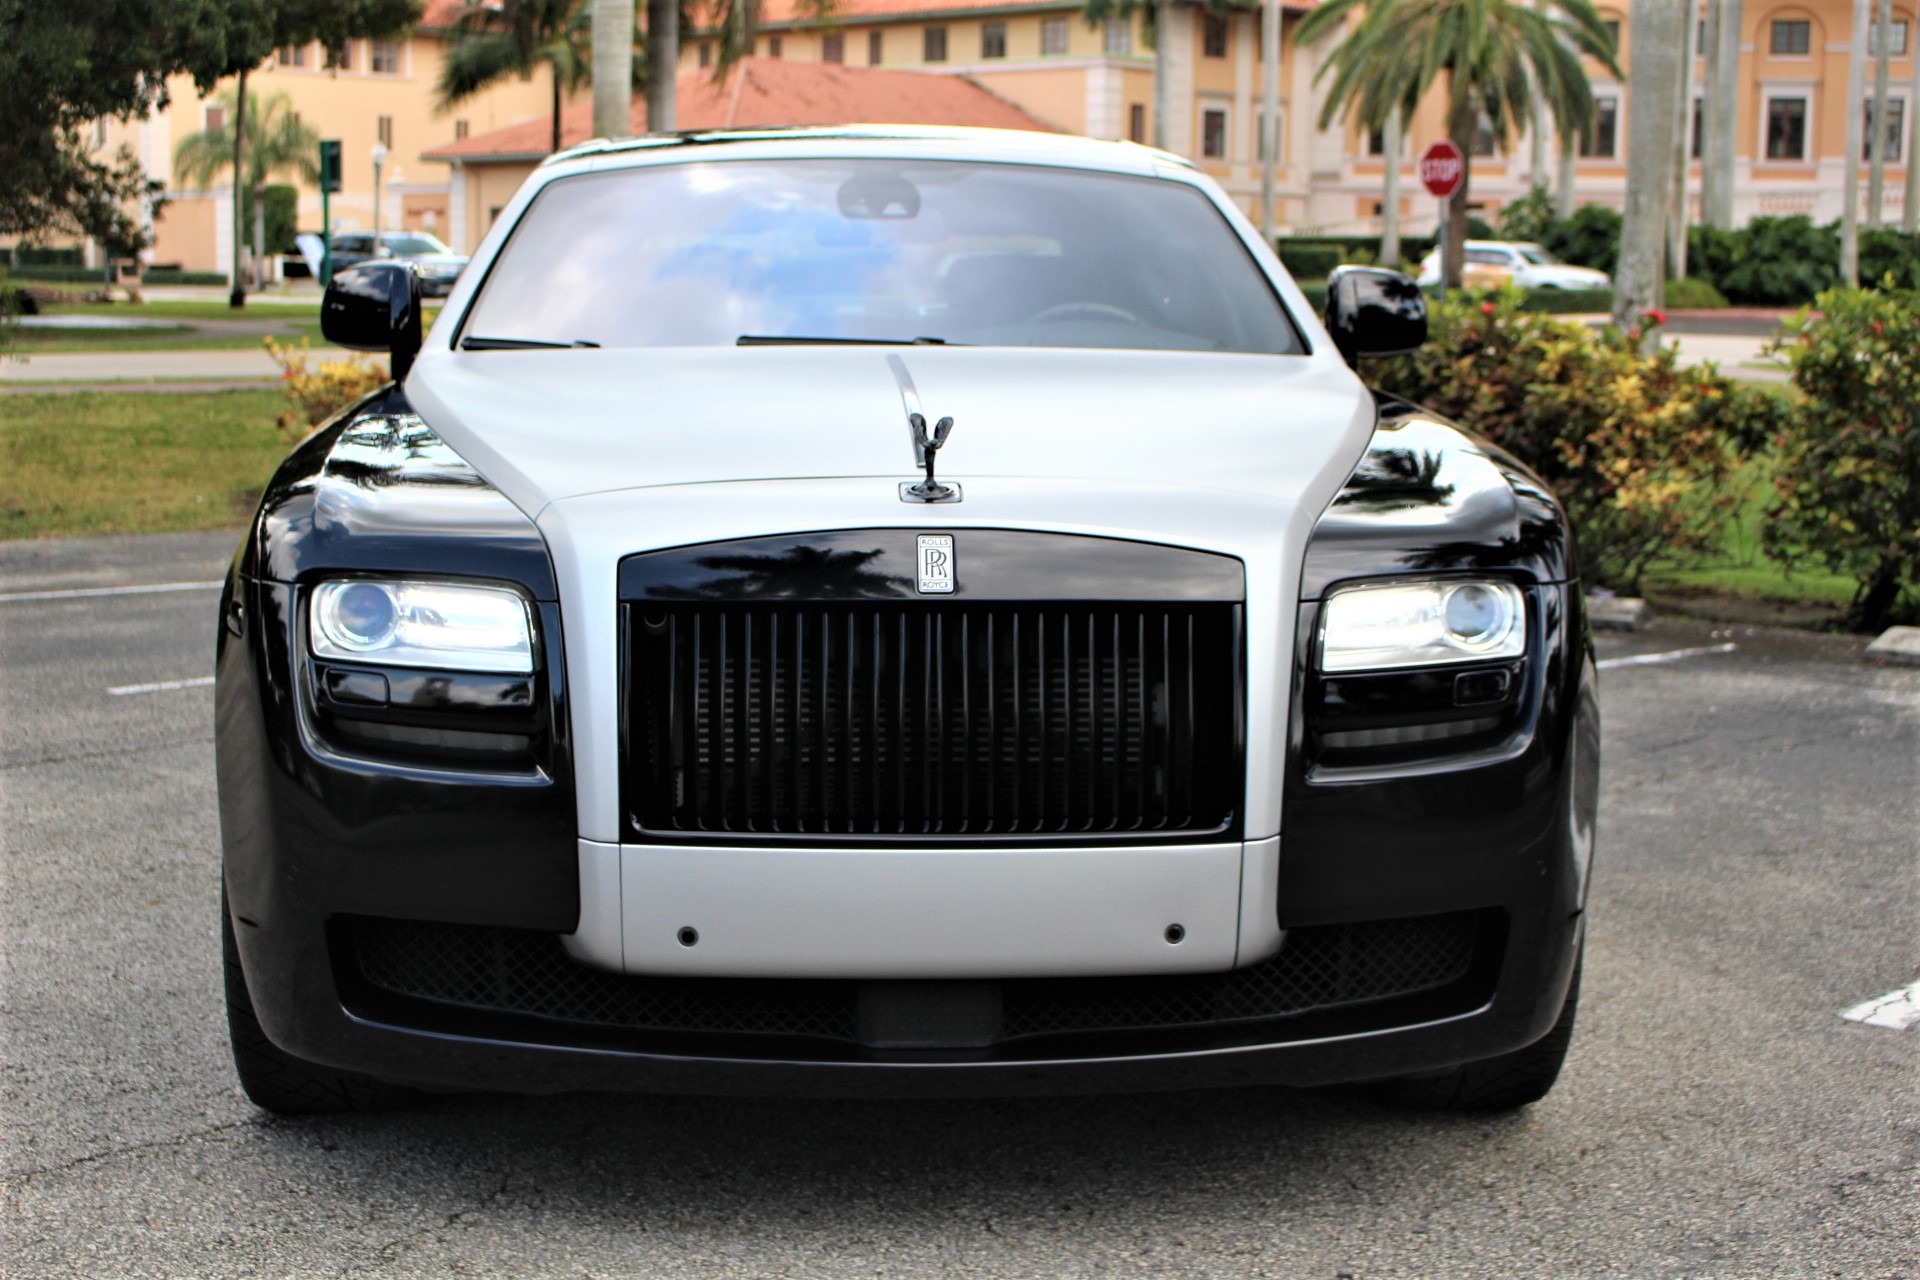 Used 2011 Rolls-Royce Ghost for sale Sold at The Gables Sports Cars in Miami FL 33146 3